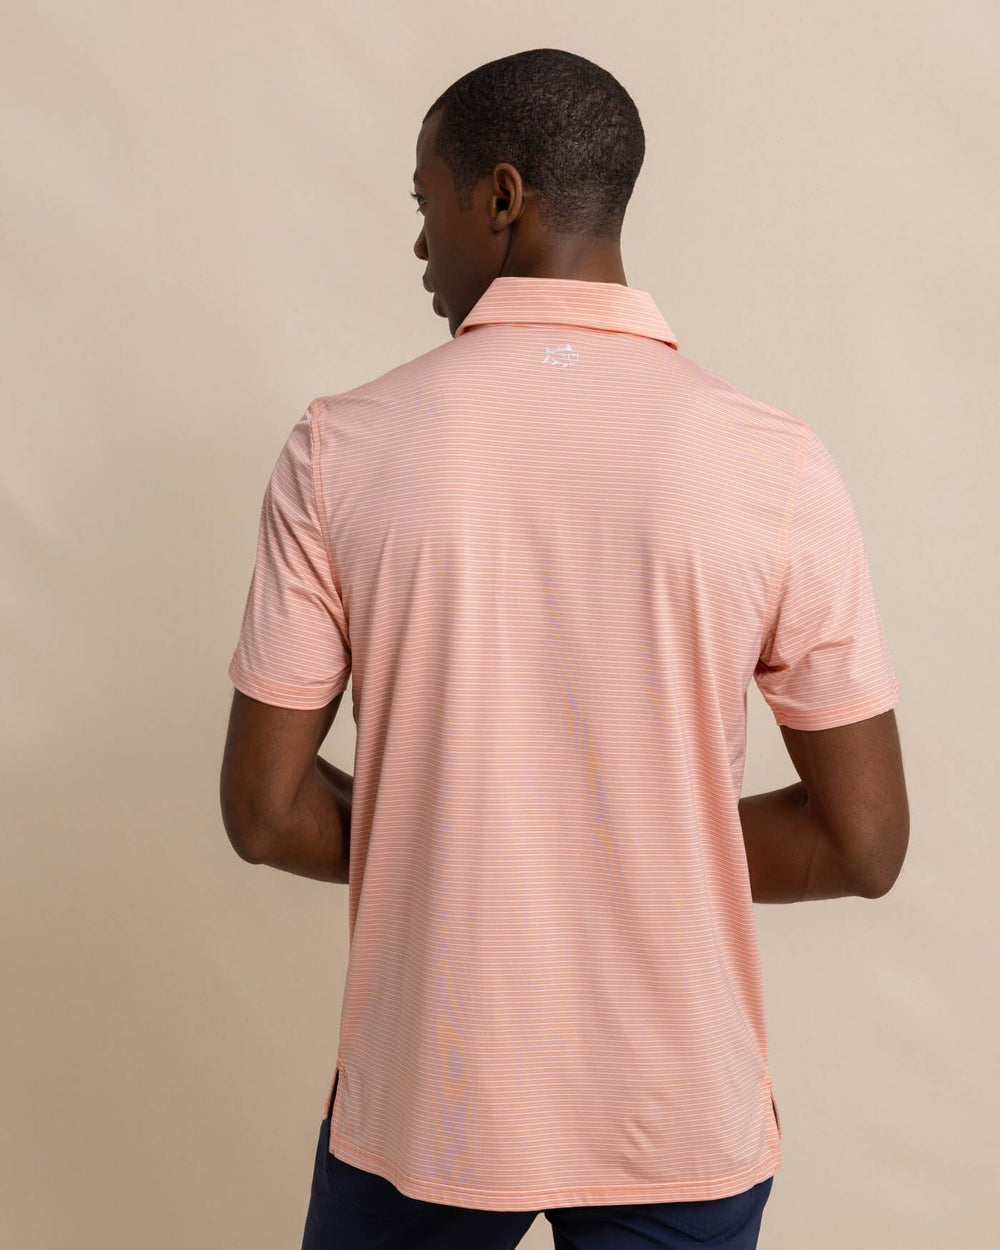 The back view of the Southern Tide brrr-eeze Baytop Stripe Performance Polo by Southern Tide - Desert Flower Coral